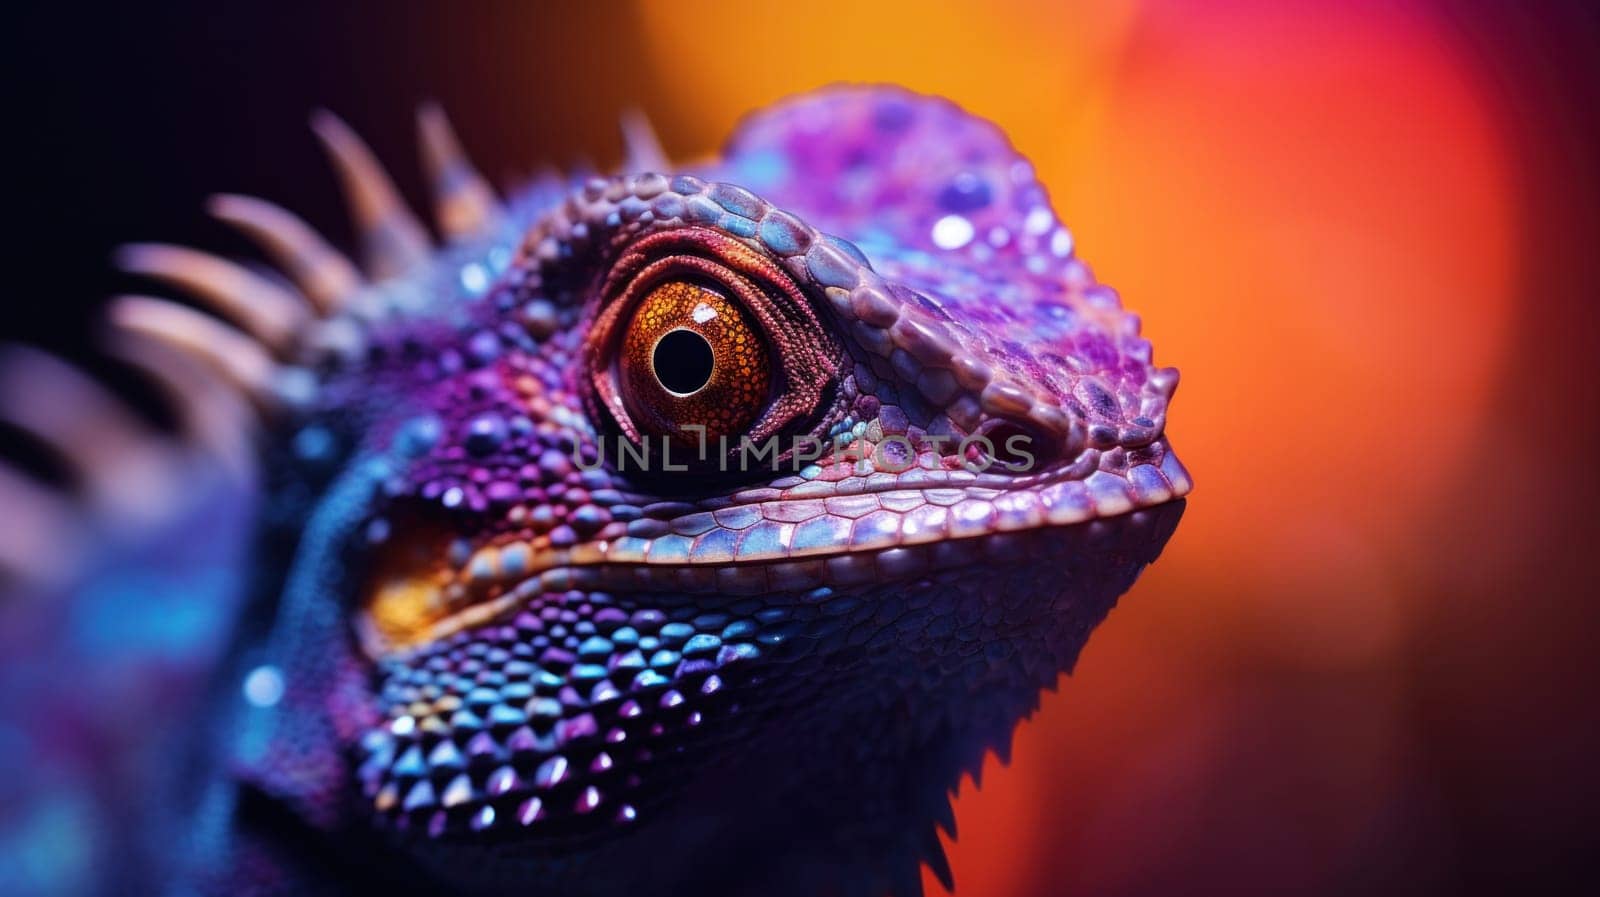 A close up of a colorful lizard with bright eyes, AI by starush